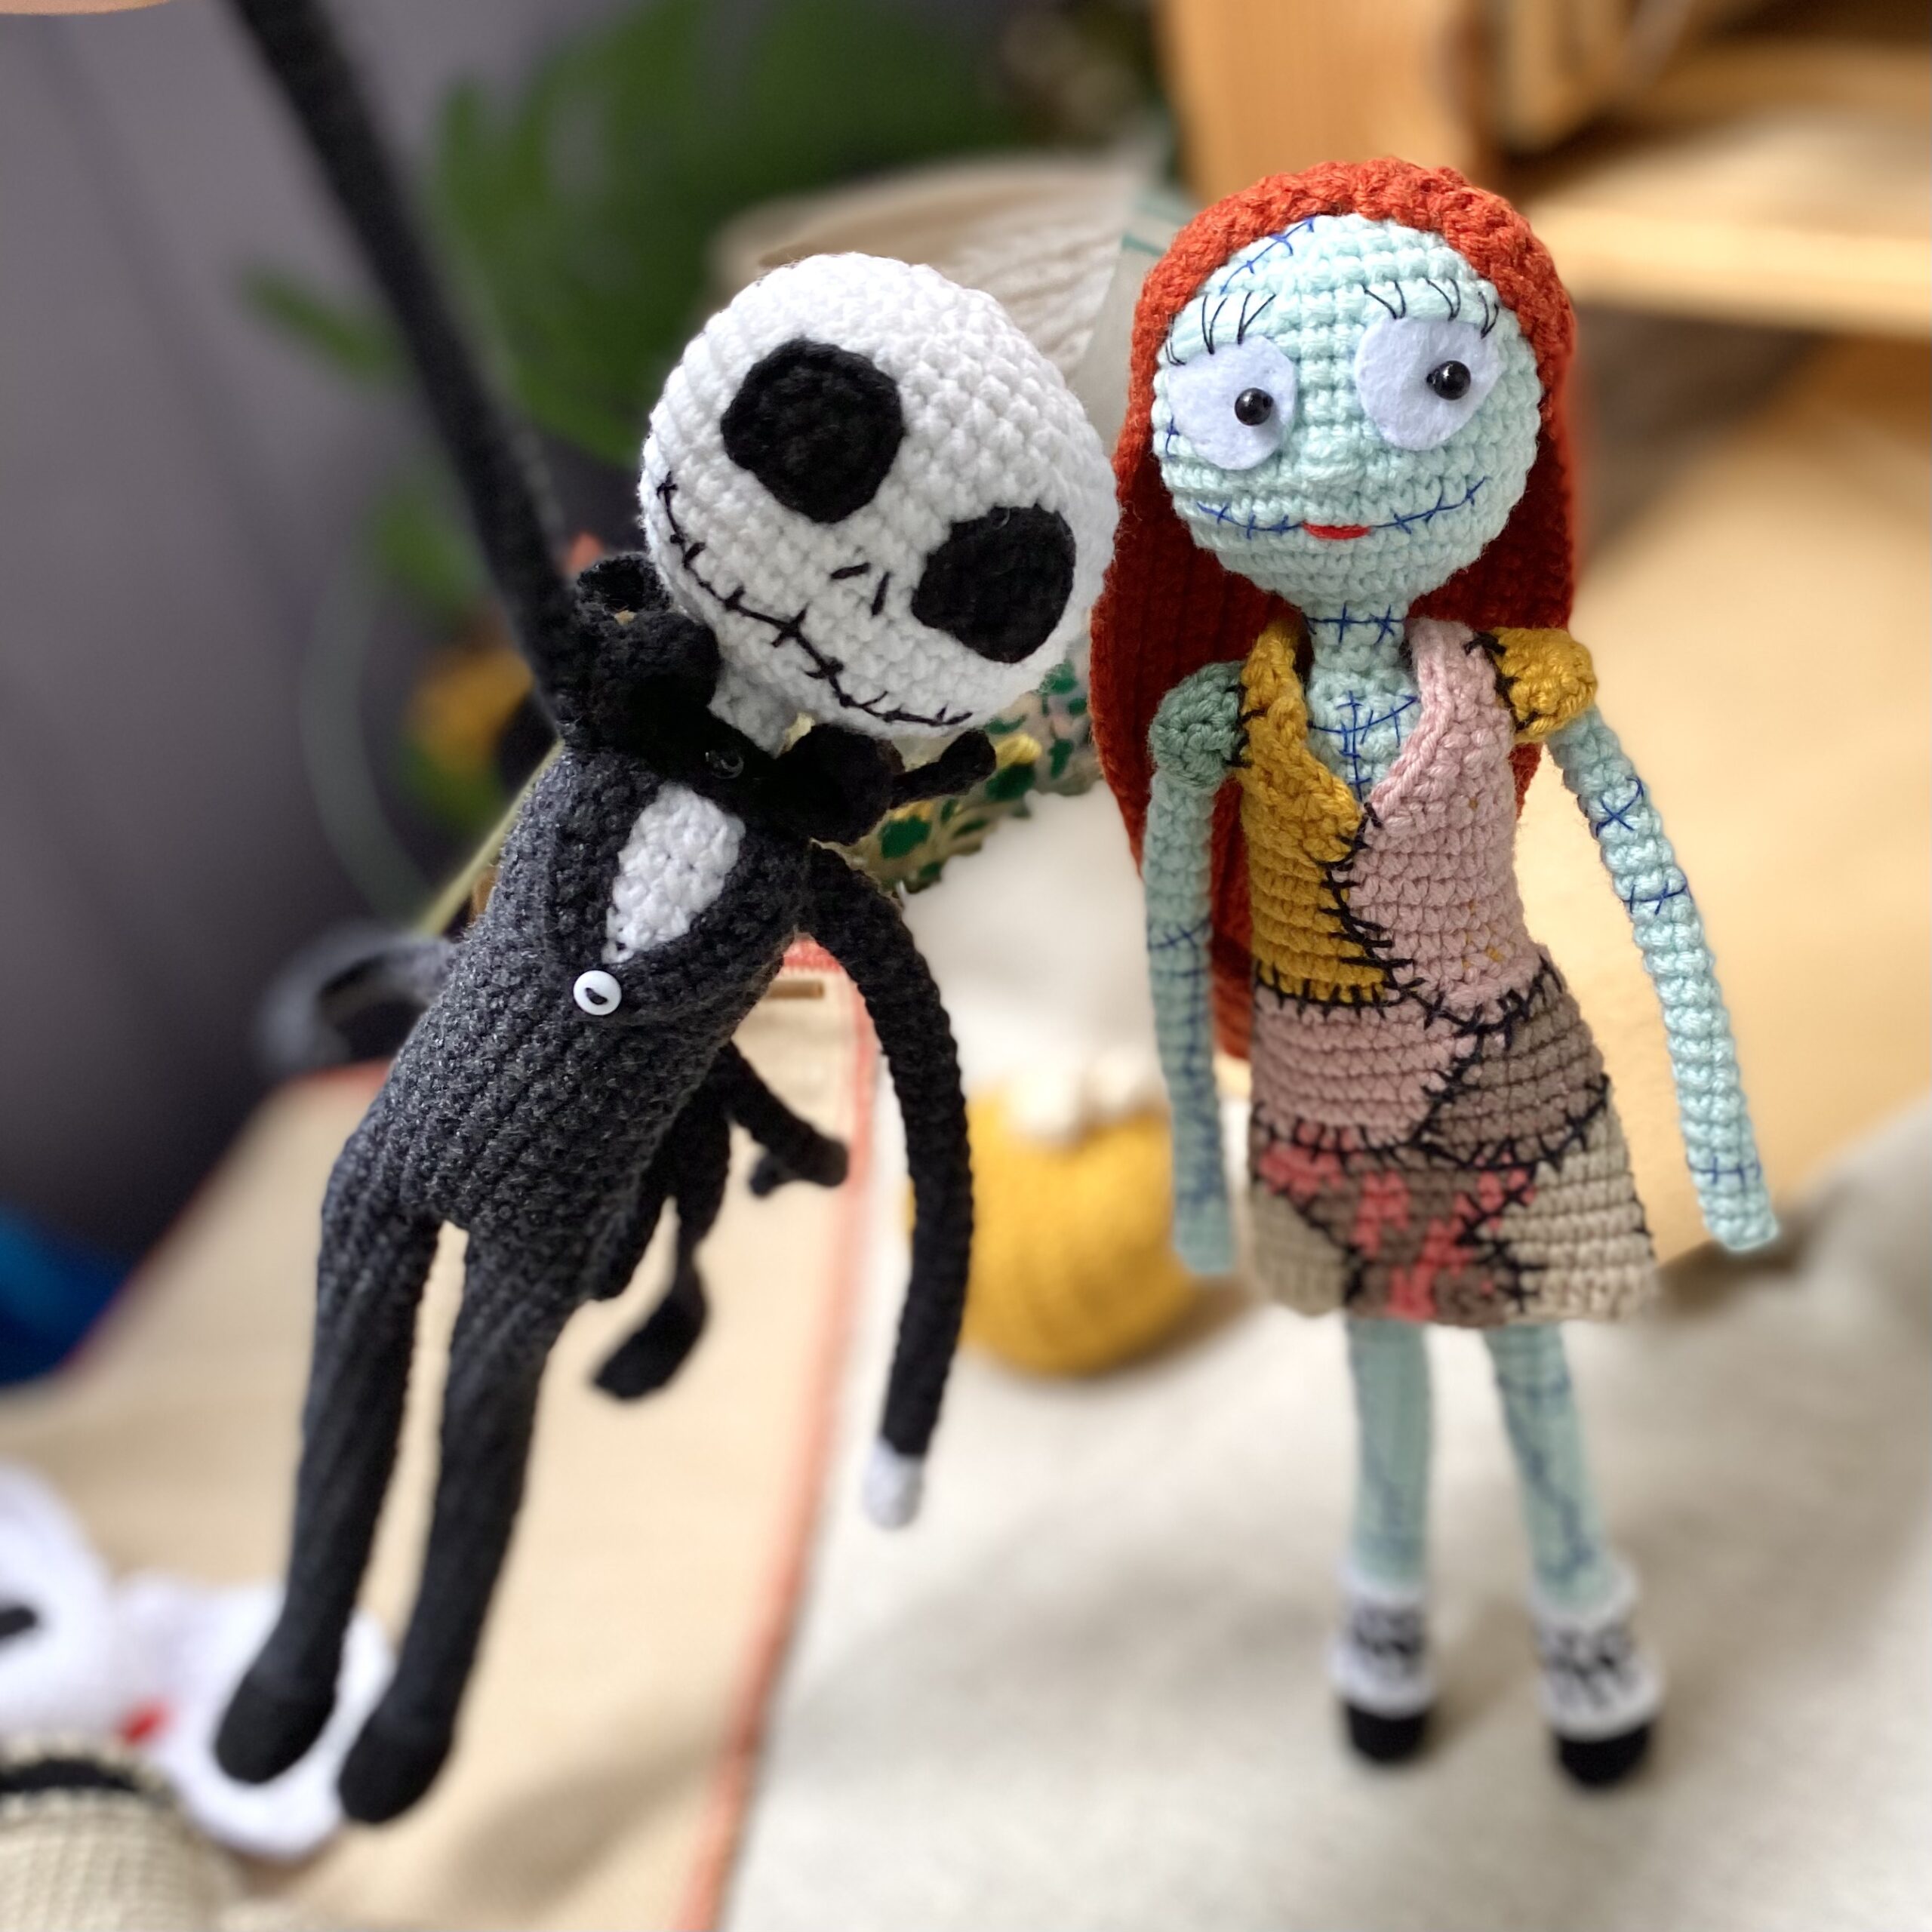 CROCHETING MY VERY OWN SALLY DOLL ~ NIGHTMARE BEFORE CHRISTMAS